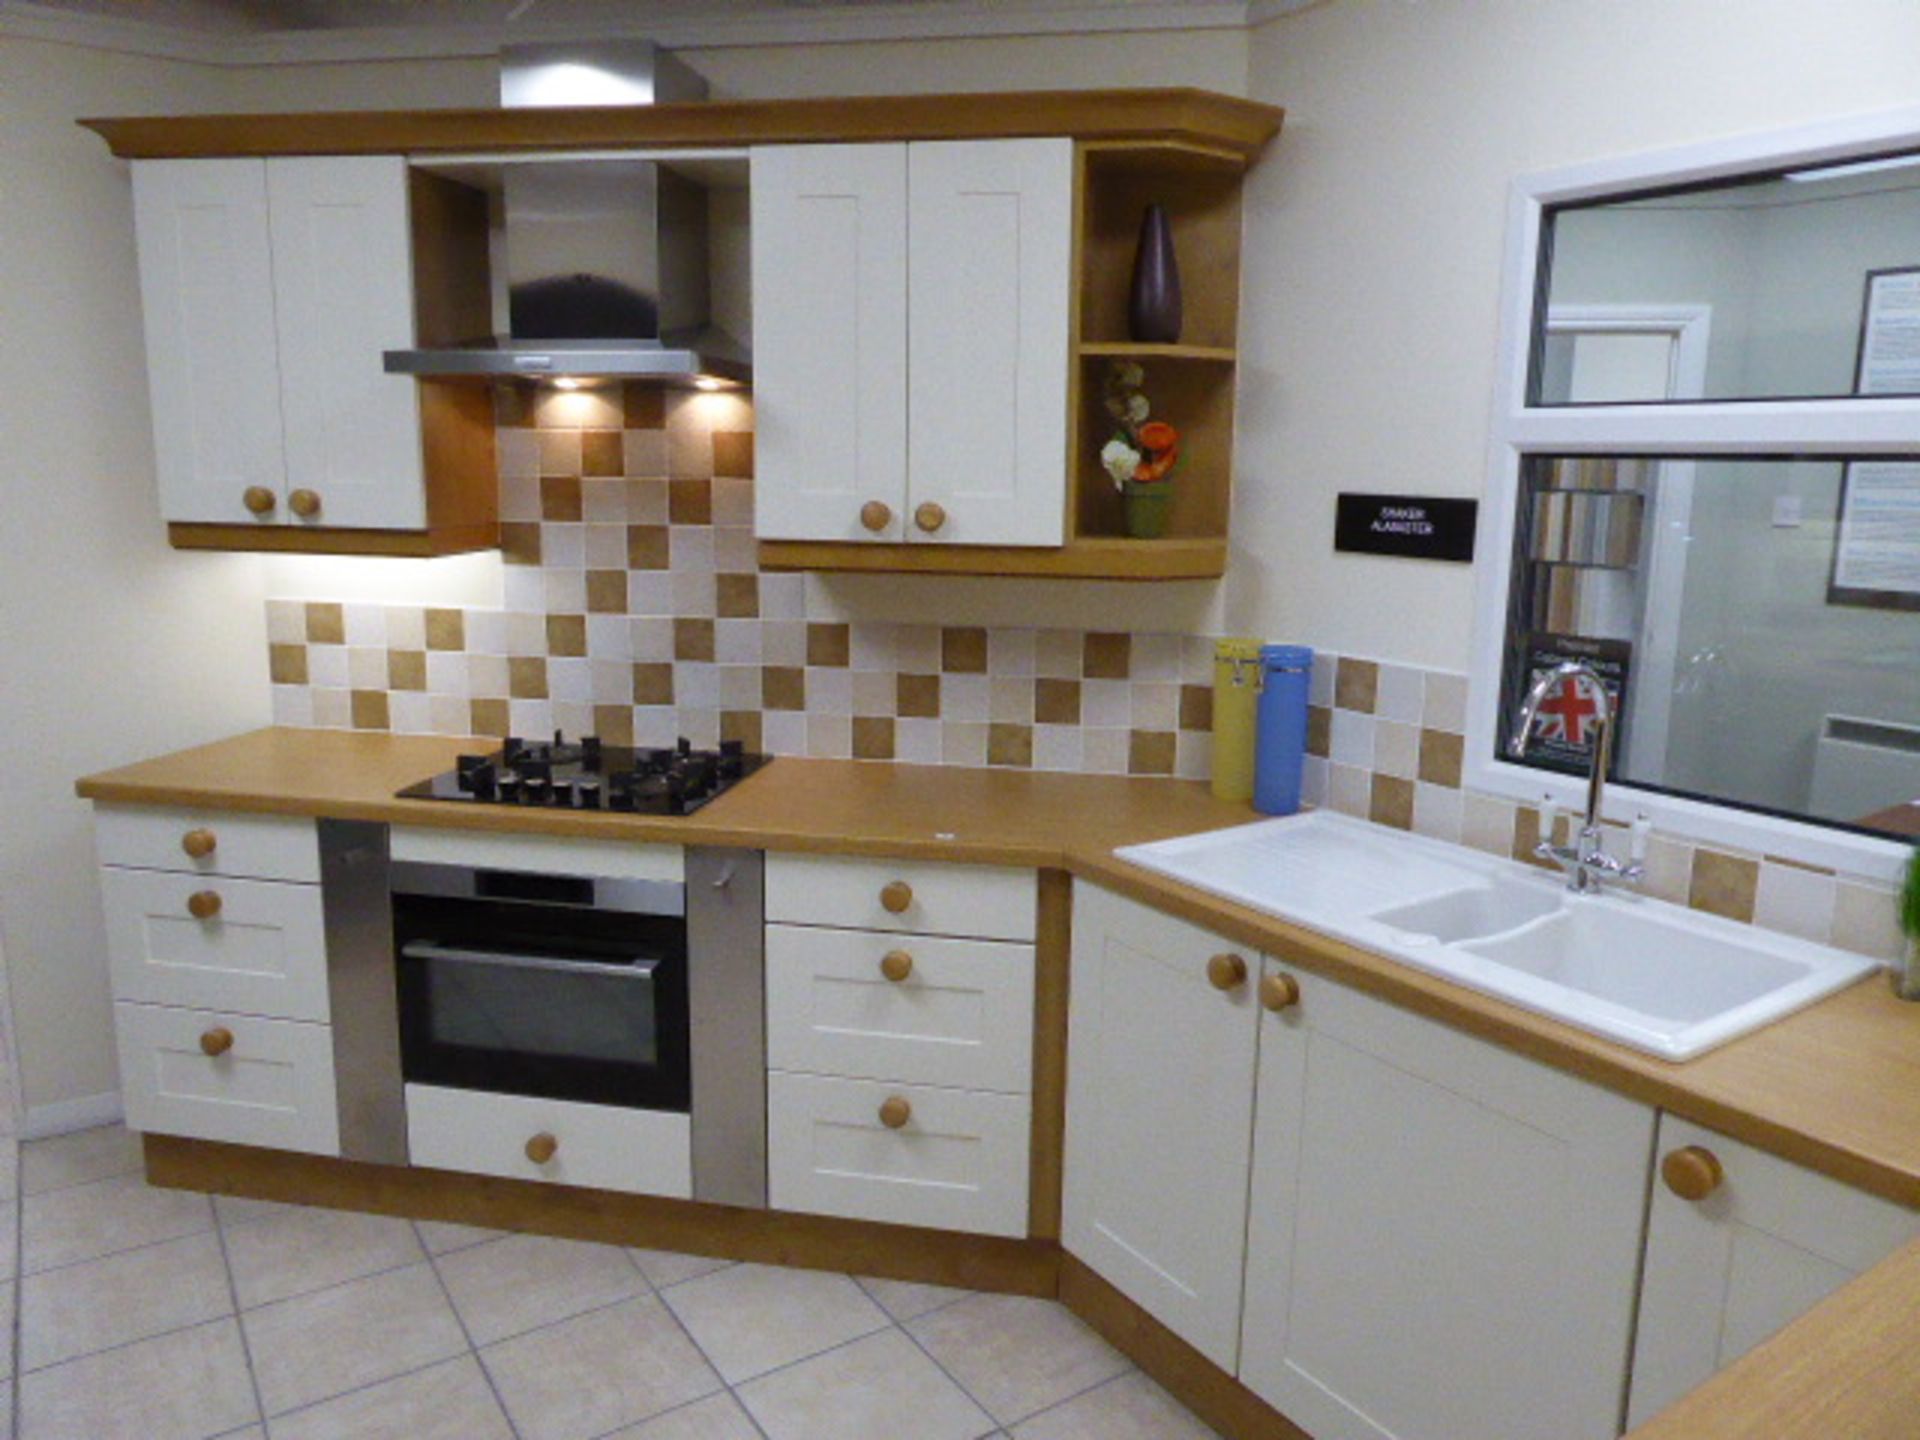 Shaker alabaster kitchen with oak wood laminate worktops. Max measurement is 380cm x 210cm. With - Image 2 of 10